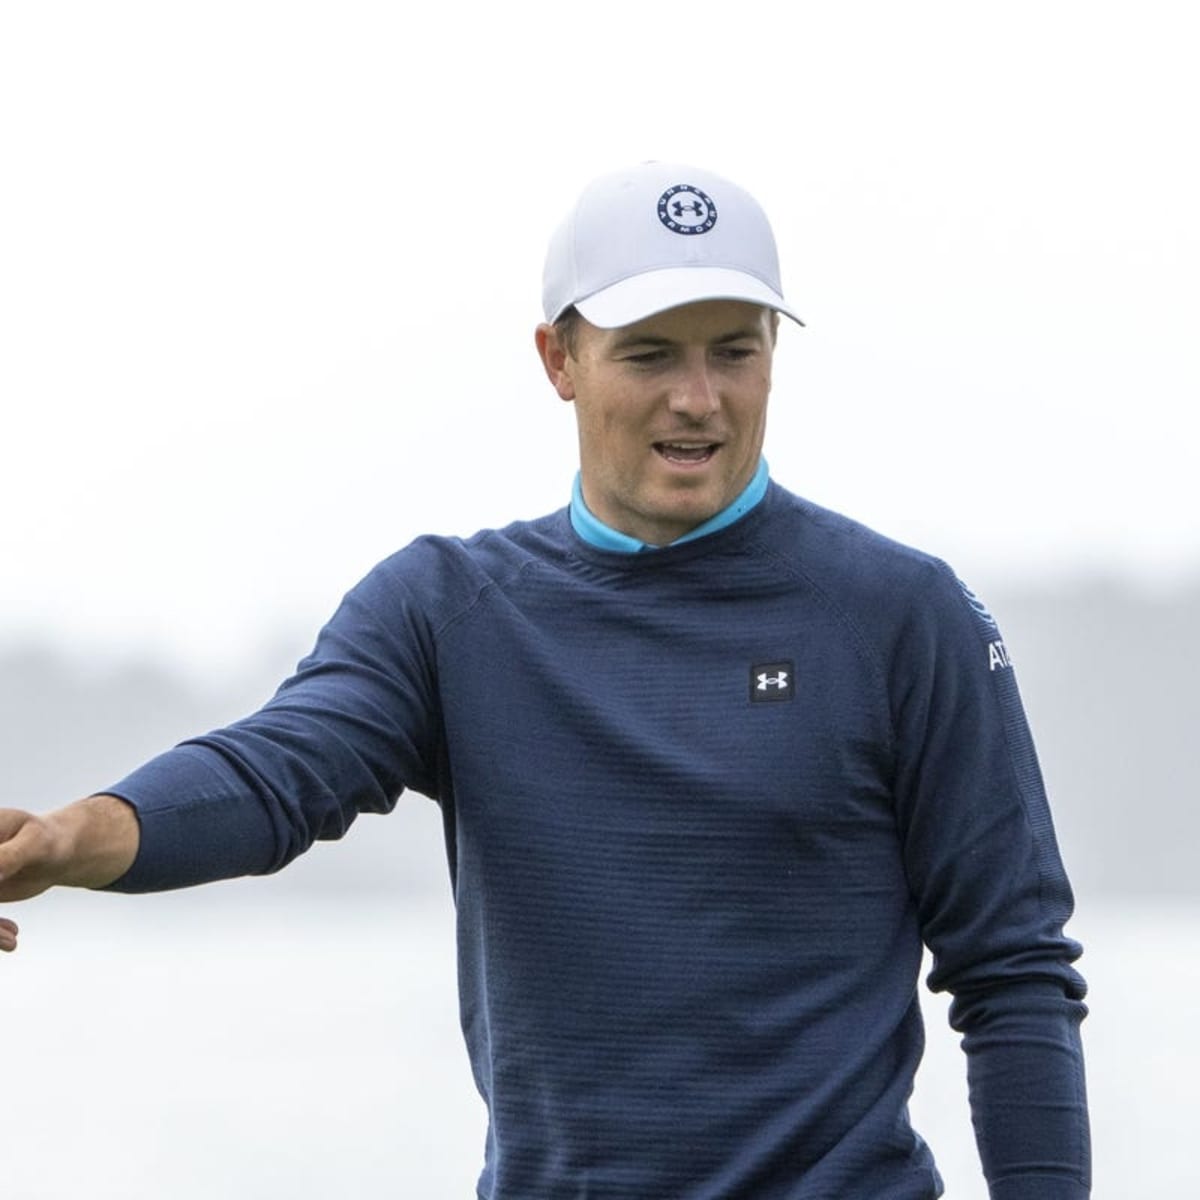 Jordan Spieth at the Arnold Palmer Invitational presented by Mastercard Live Stream, TV Channel March 2 - 5 - How to Watch and Stream Major League and College Sports